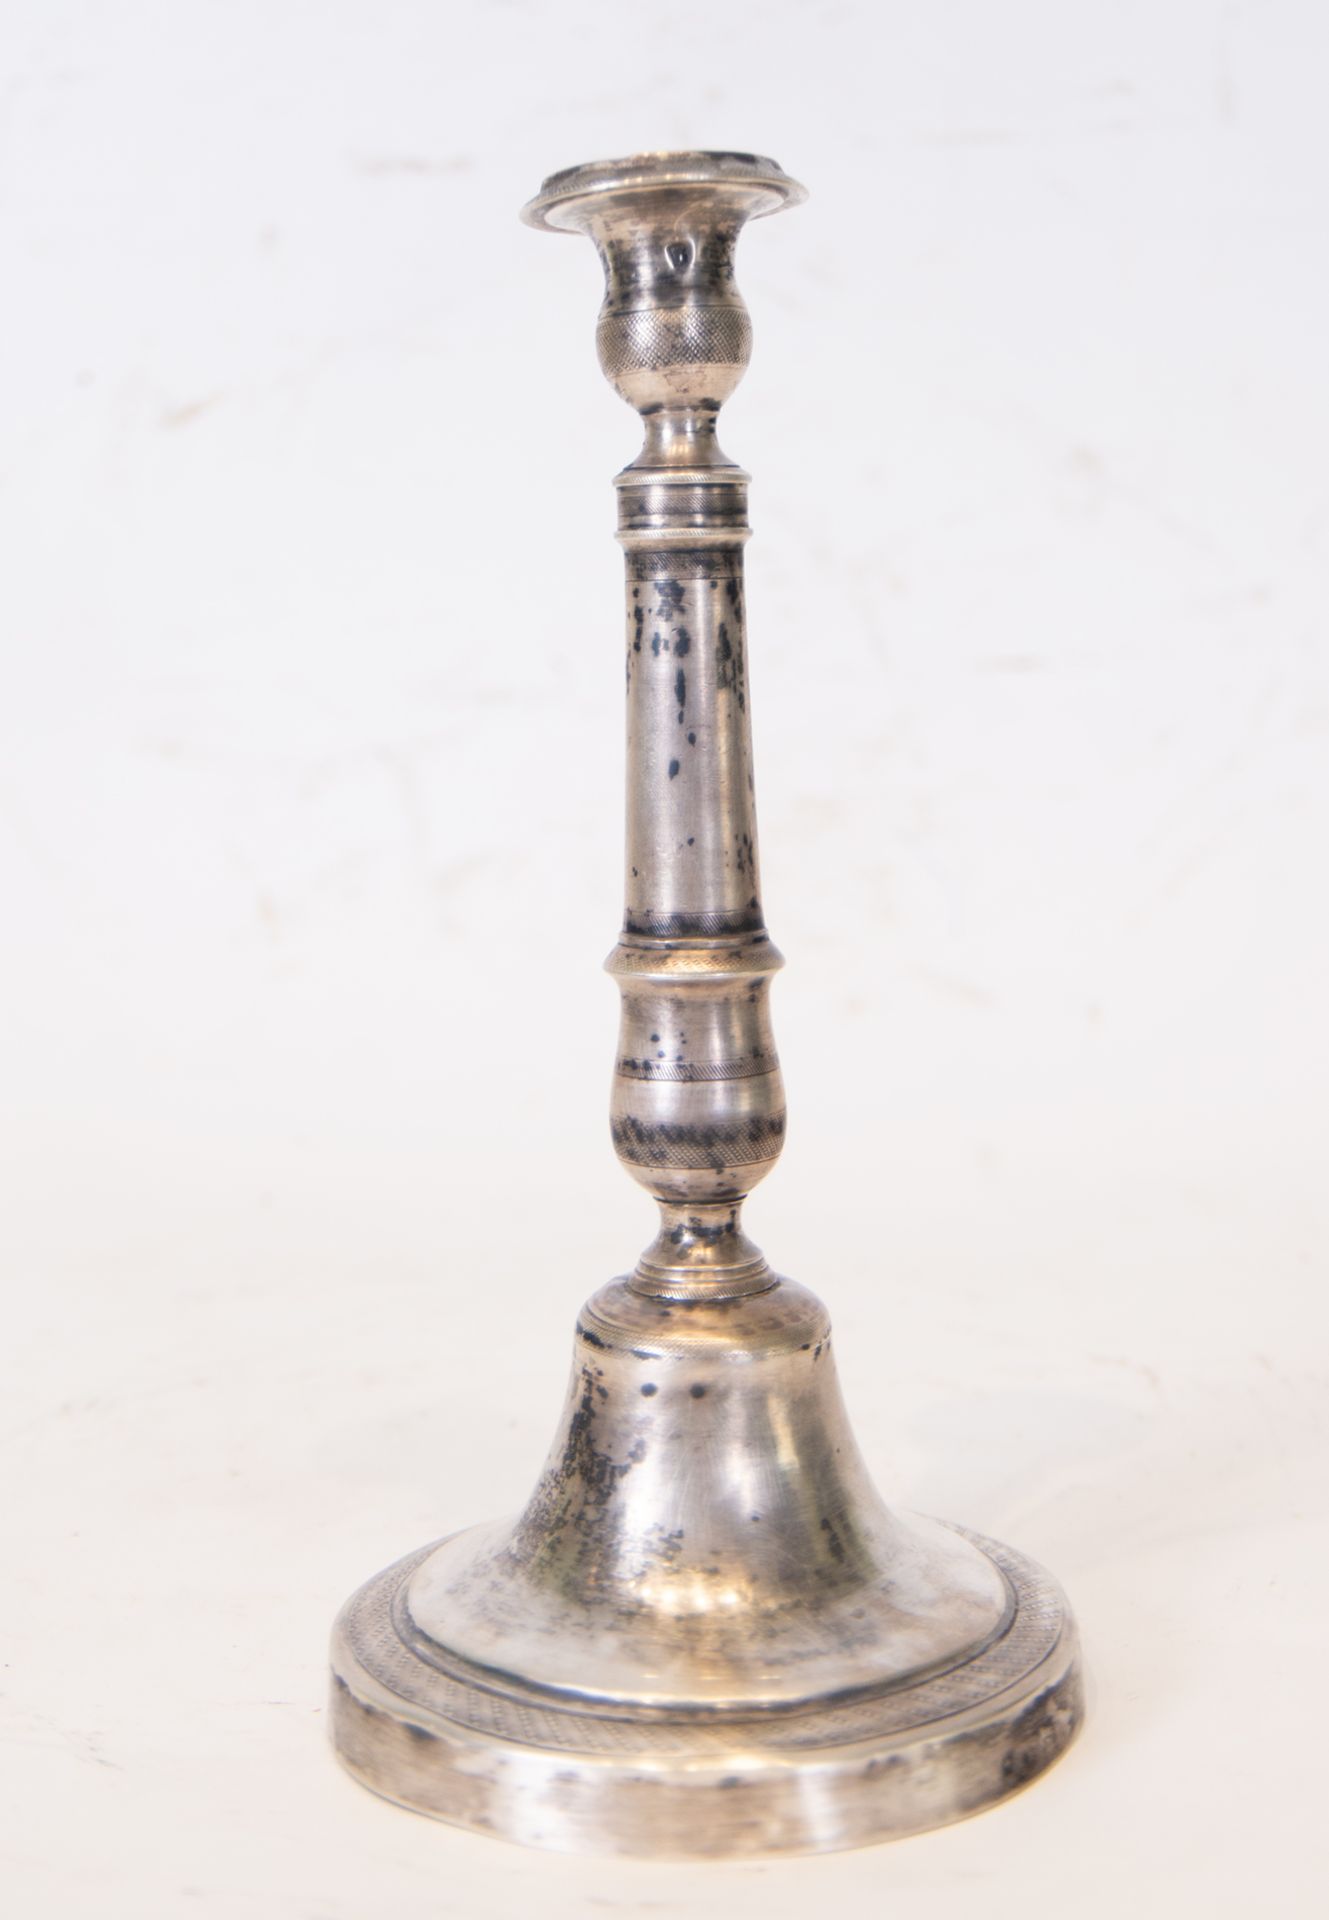 Pair of rare Fernandino candlesticks in solid silver, Spanish school of the 18th - 19th century - Image 4 of 8